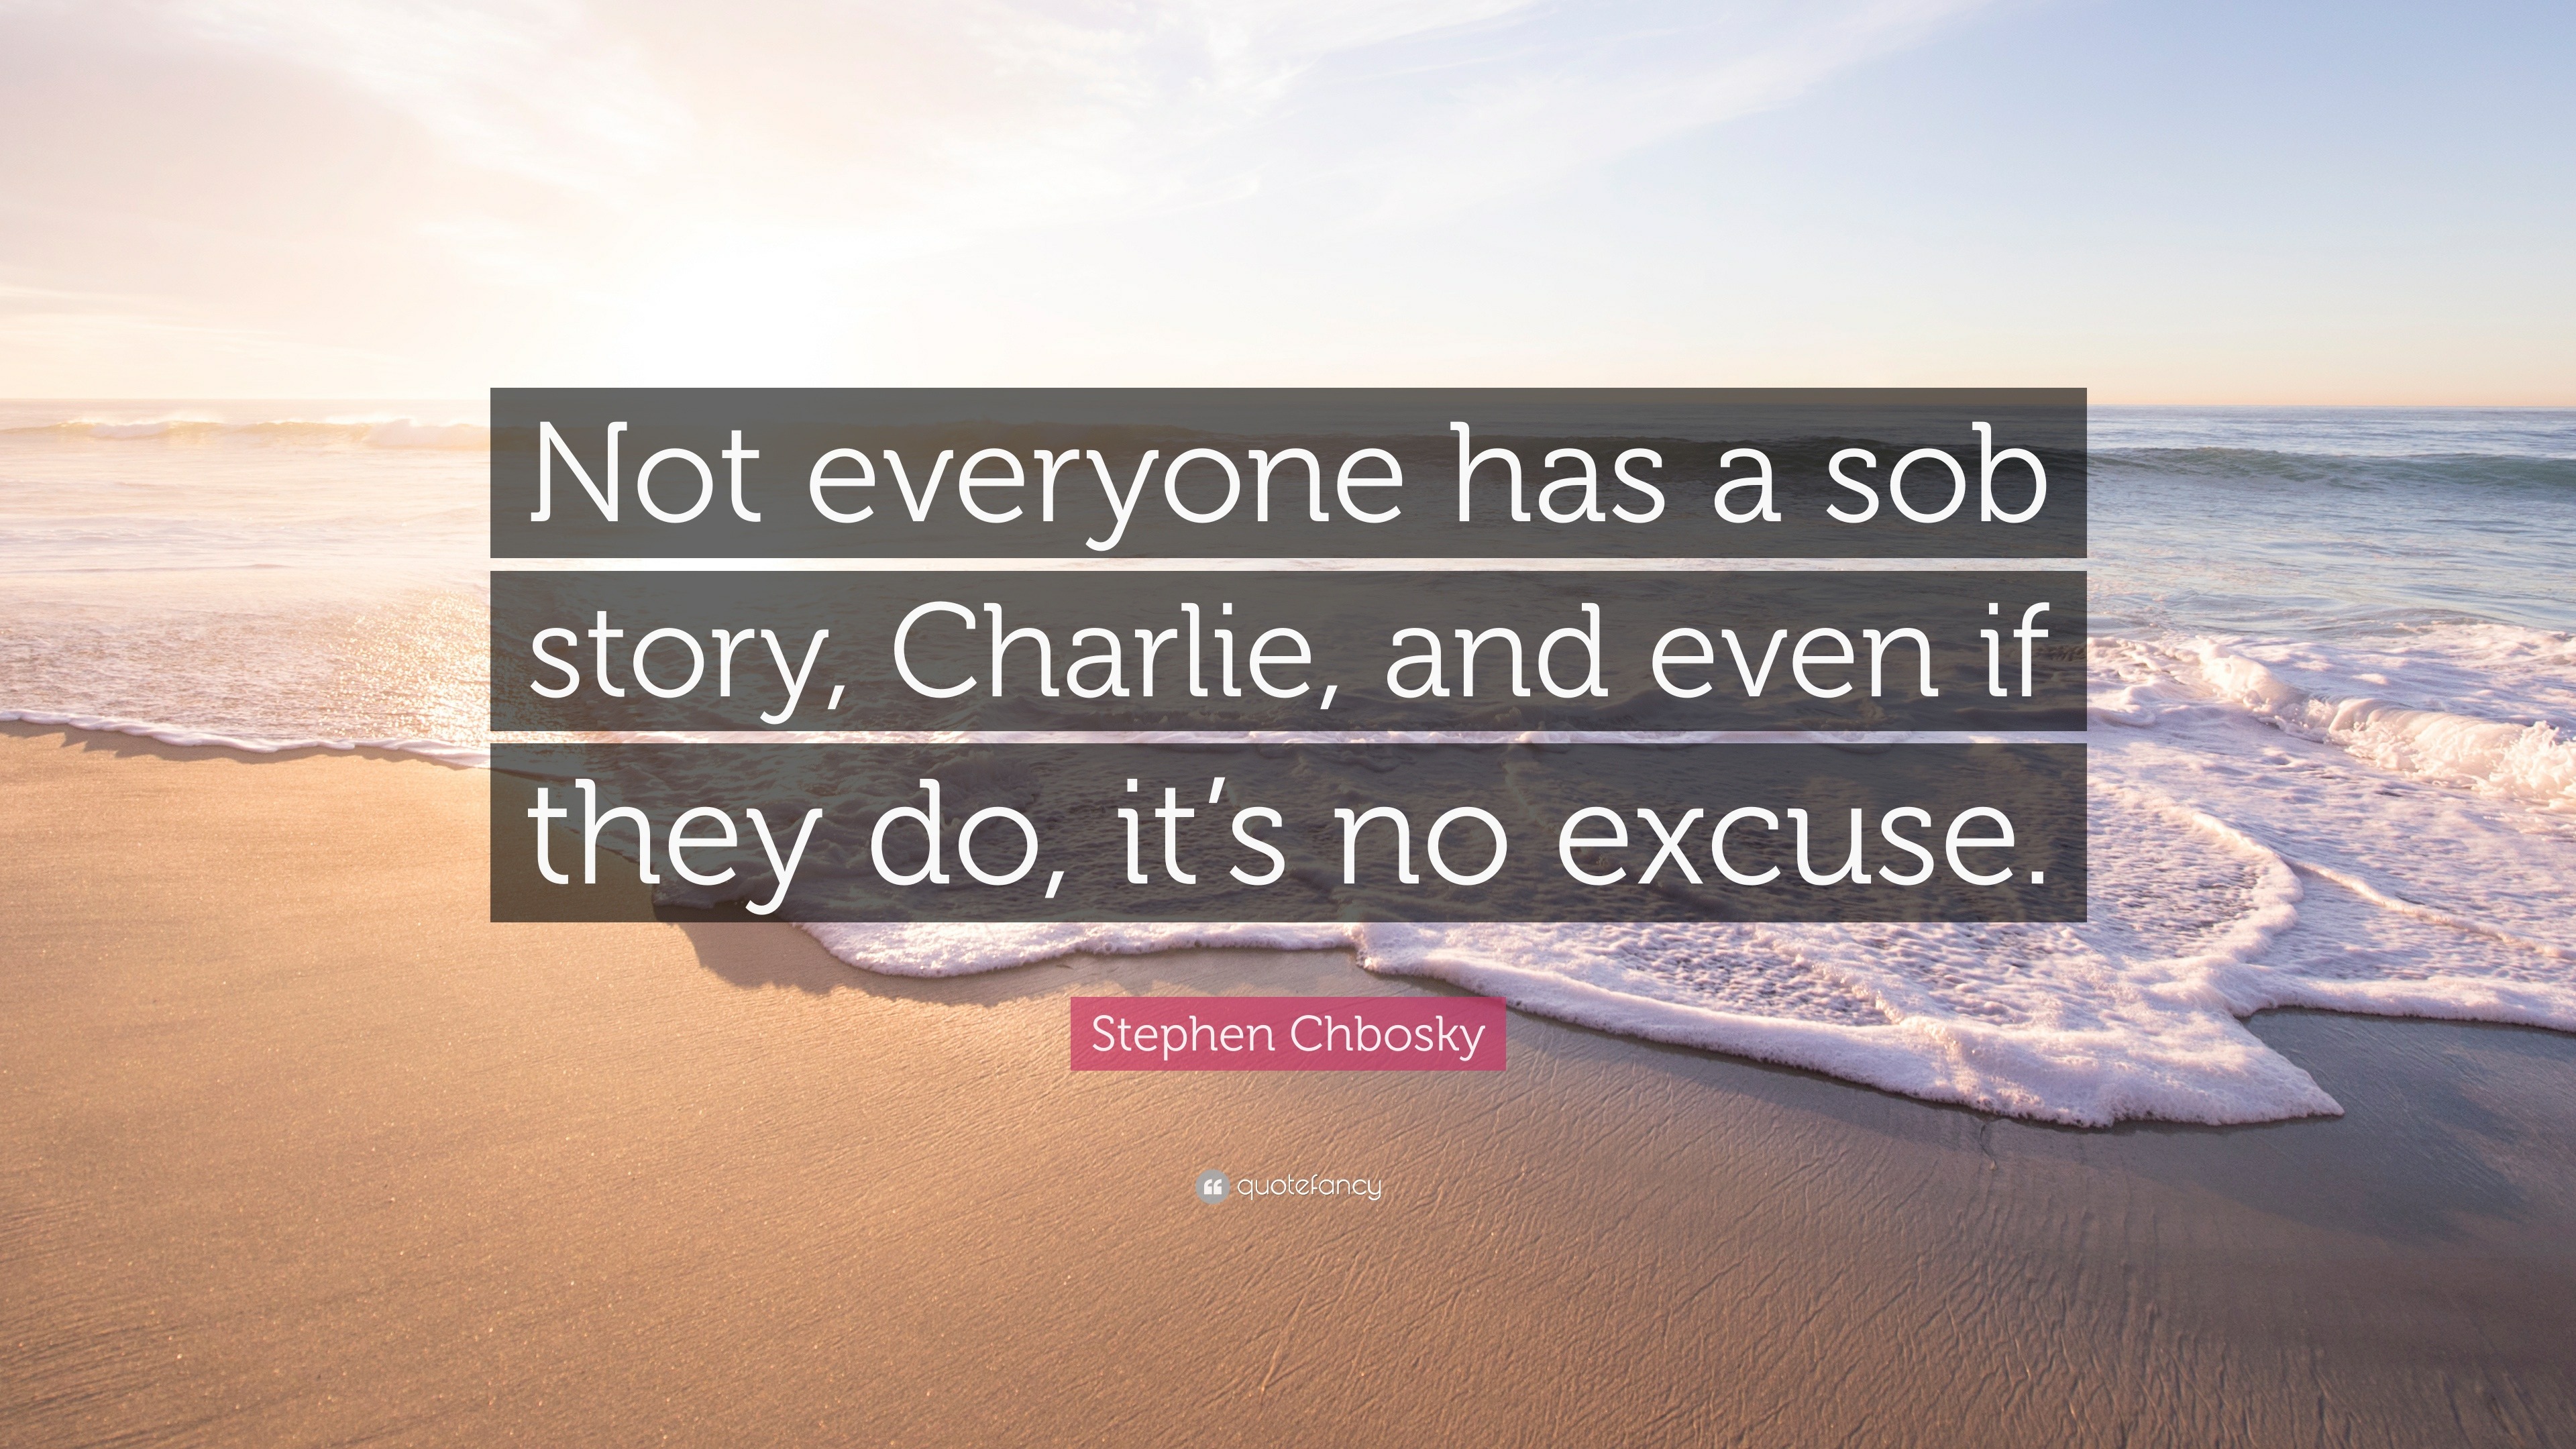 Not everyone has a sob story, Charlie, and even if they do, it’s no excuse....